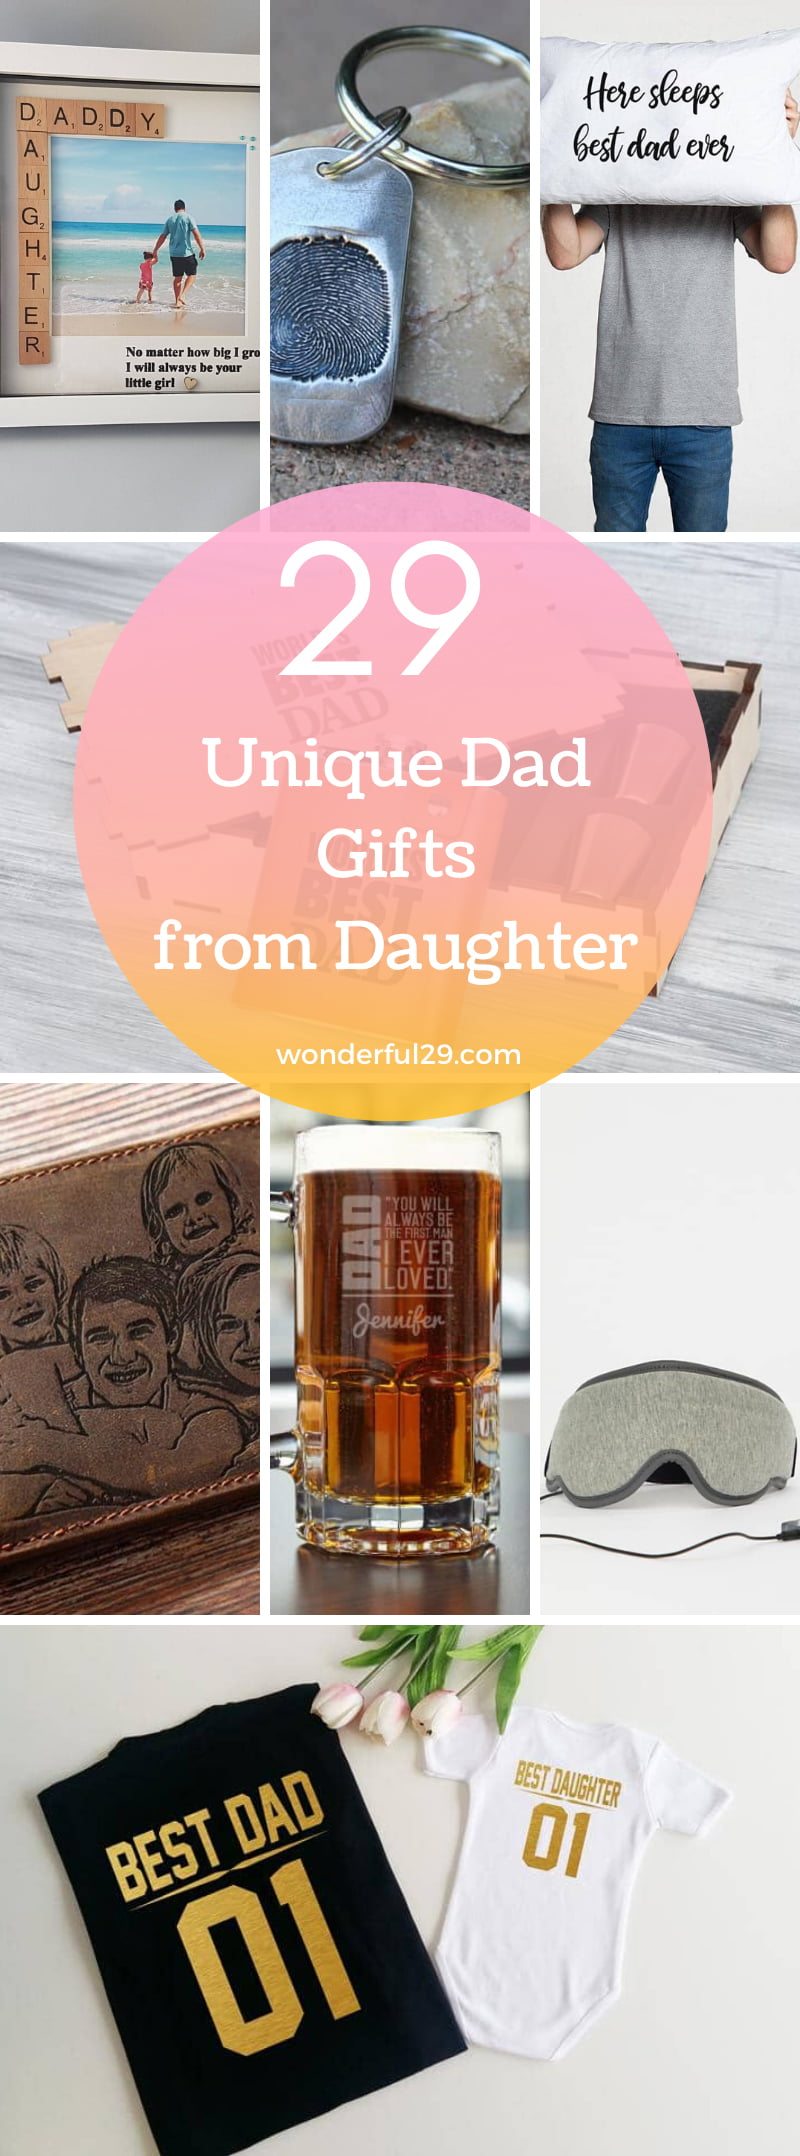 Gifts for Dad from Daughter